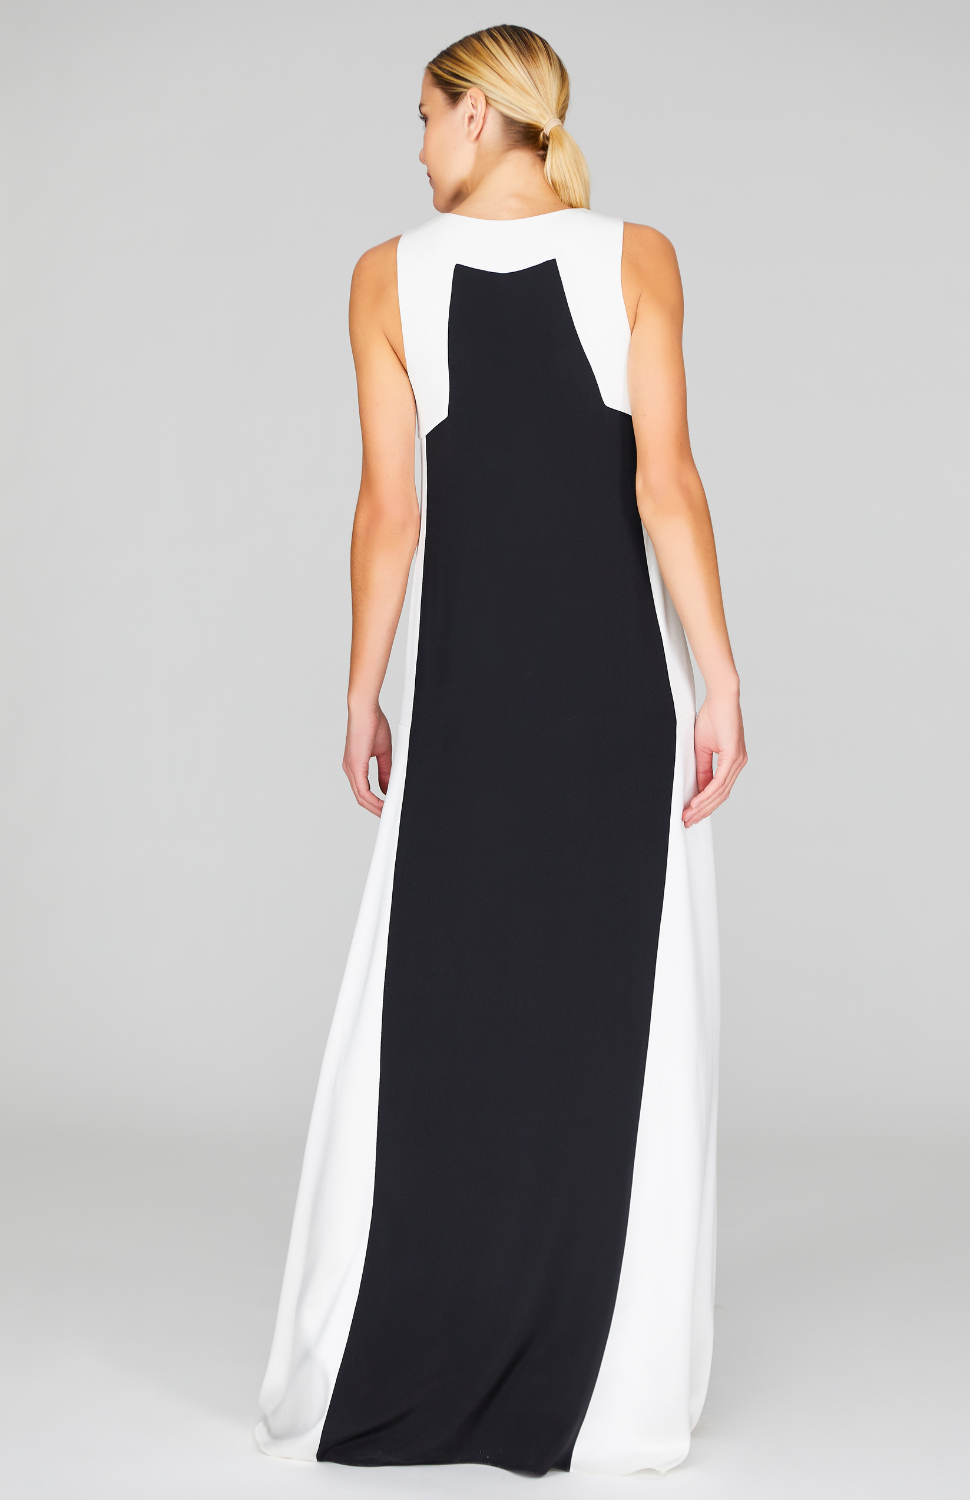 Satin V Neck Gown w/Contrast Panels